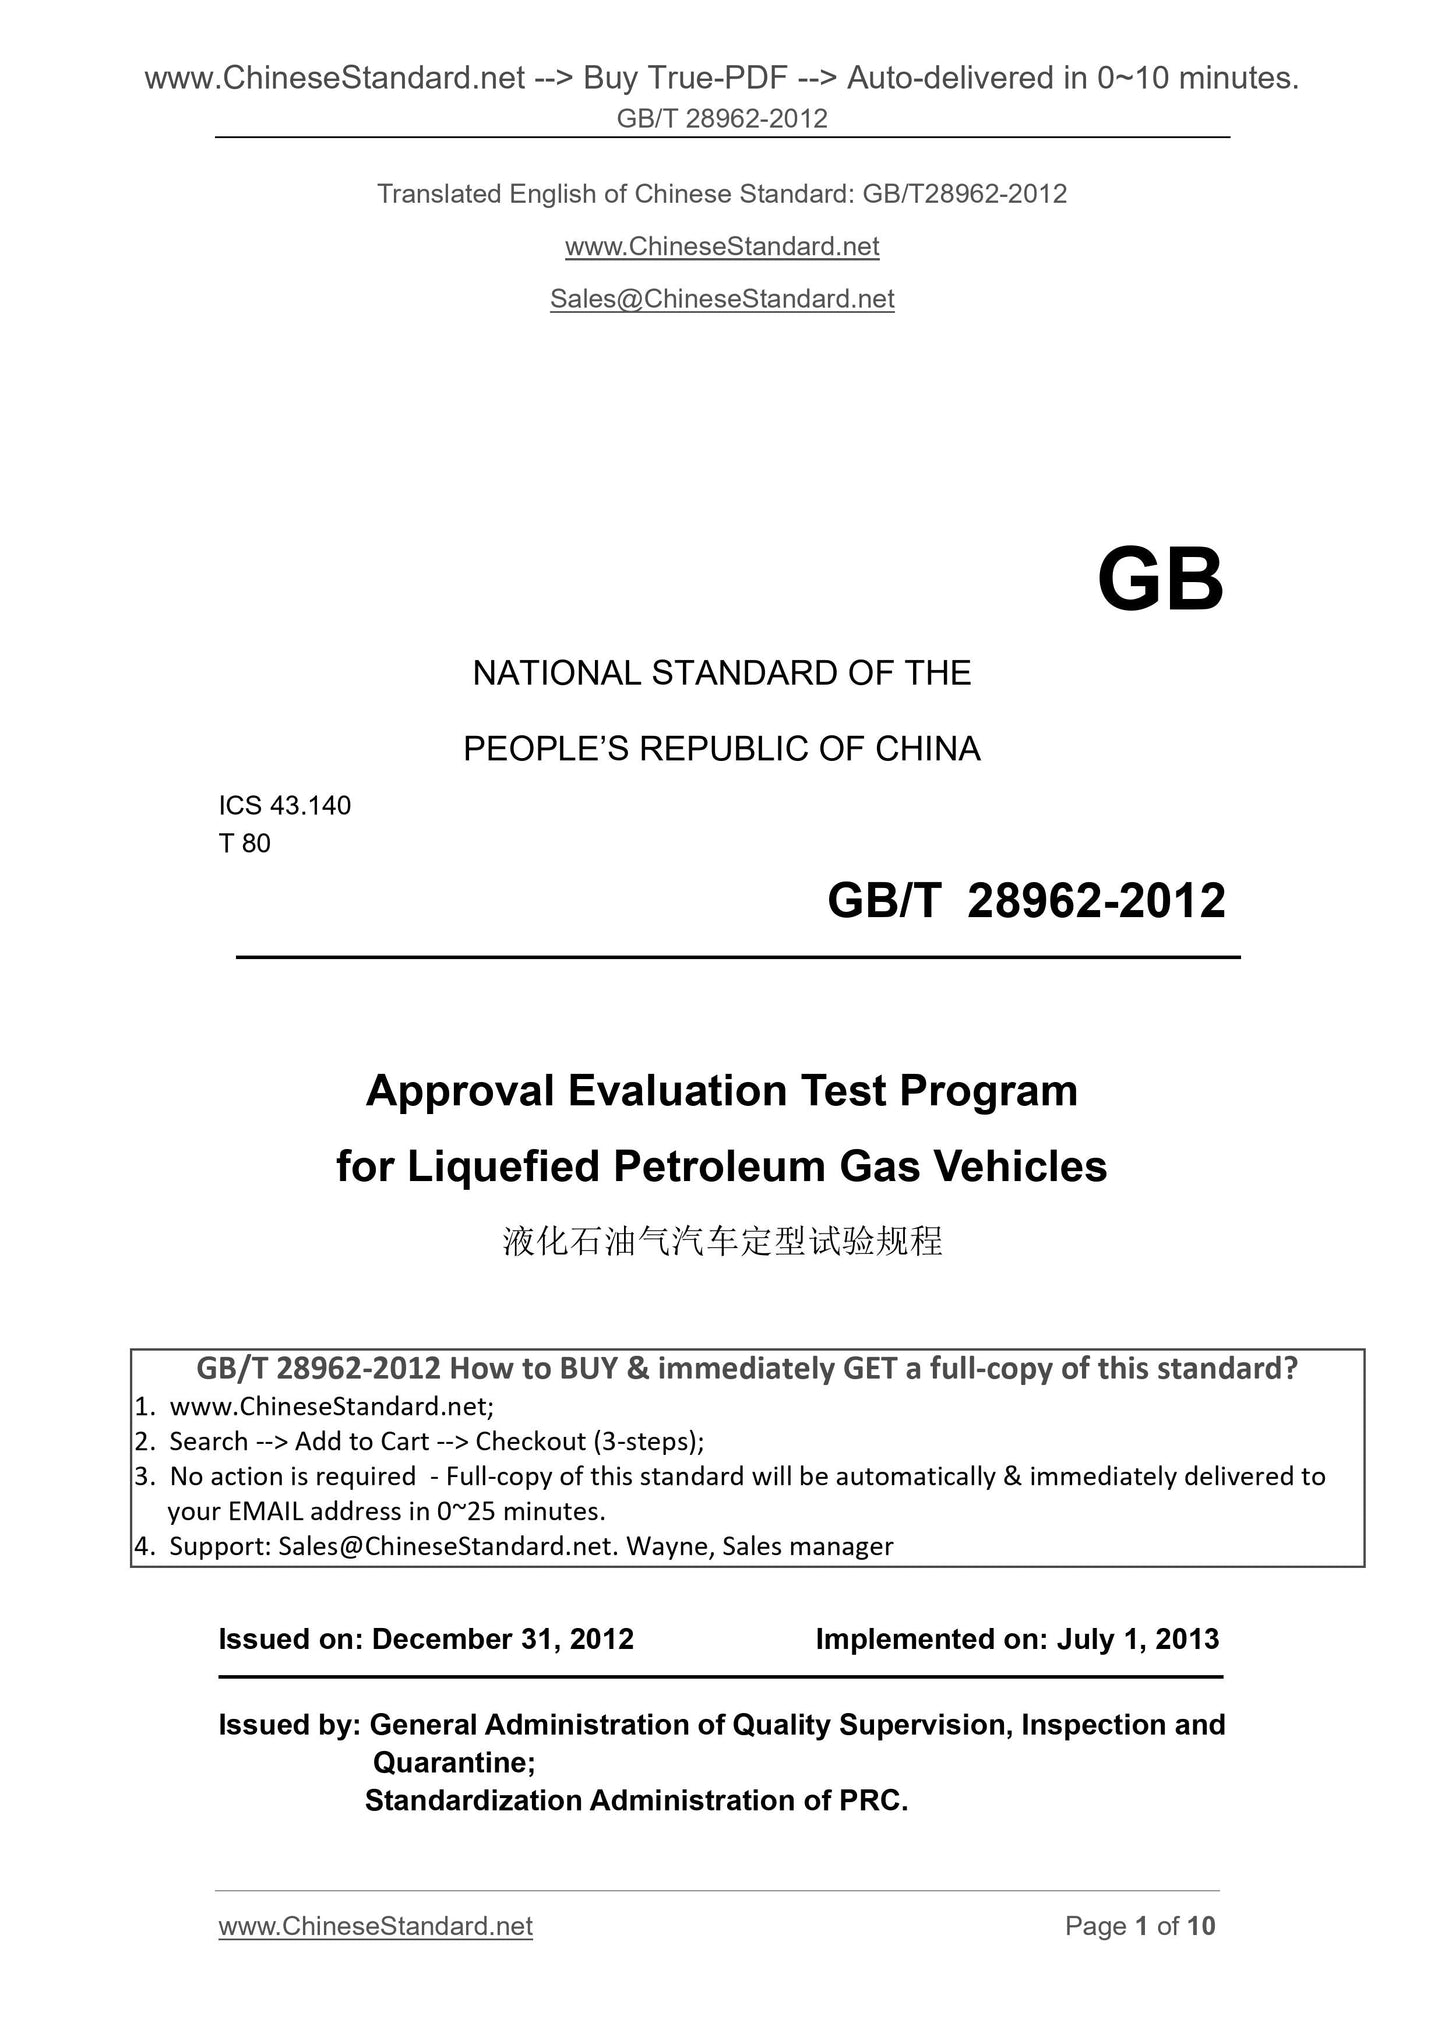 GB/T 28962-2012 Page 1